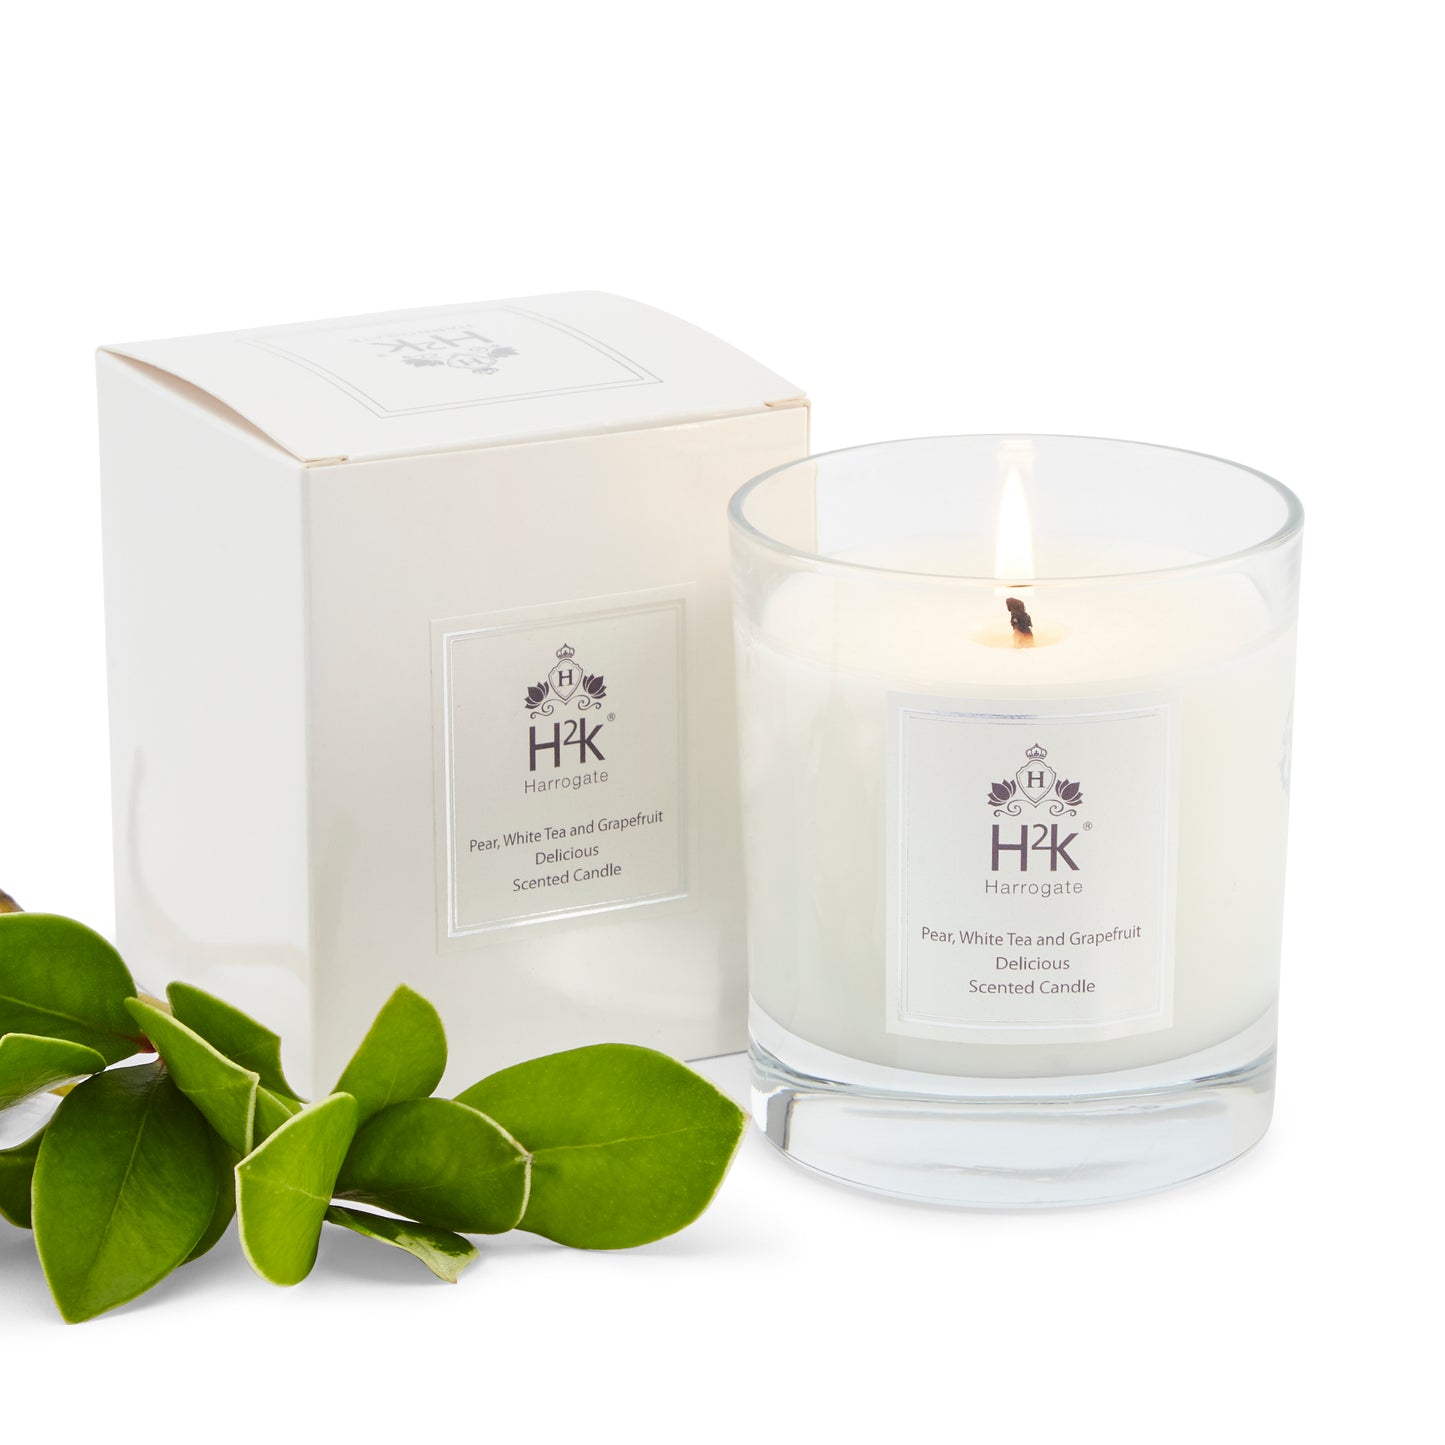 Delicious Home Scent Gift with White Tea, Pear and Grapefruit Diffuser and Candle